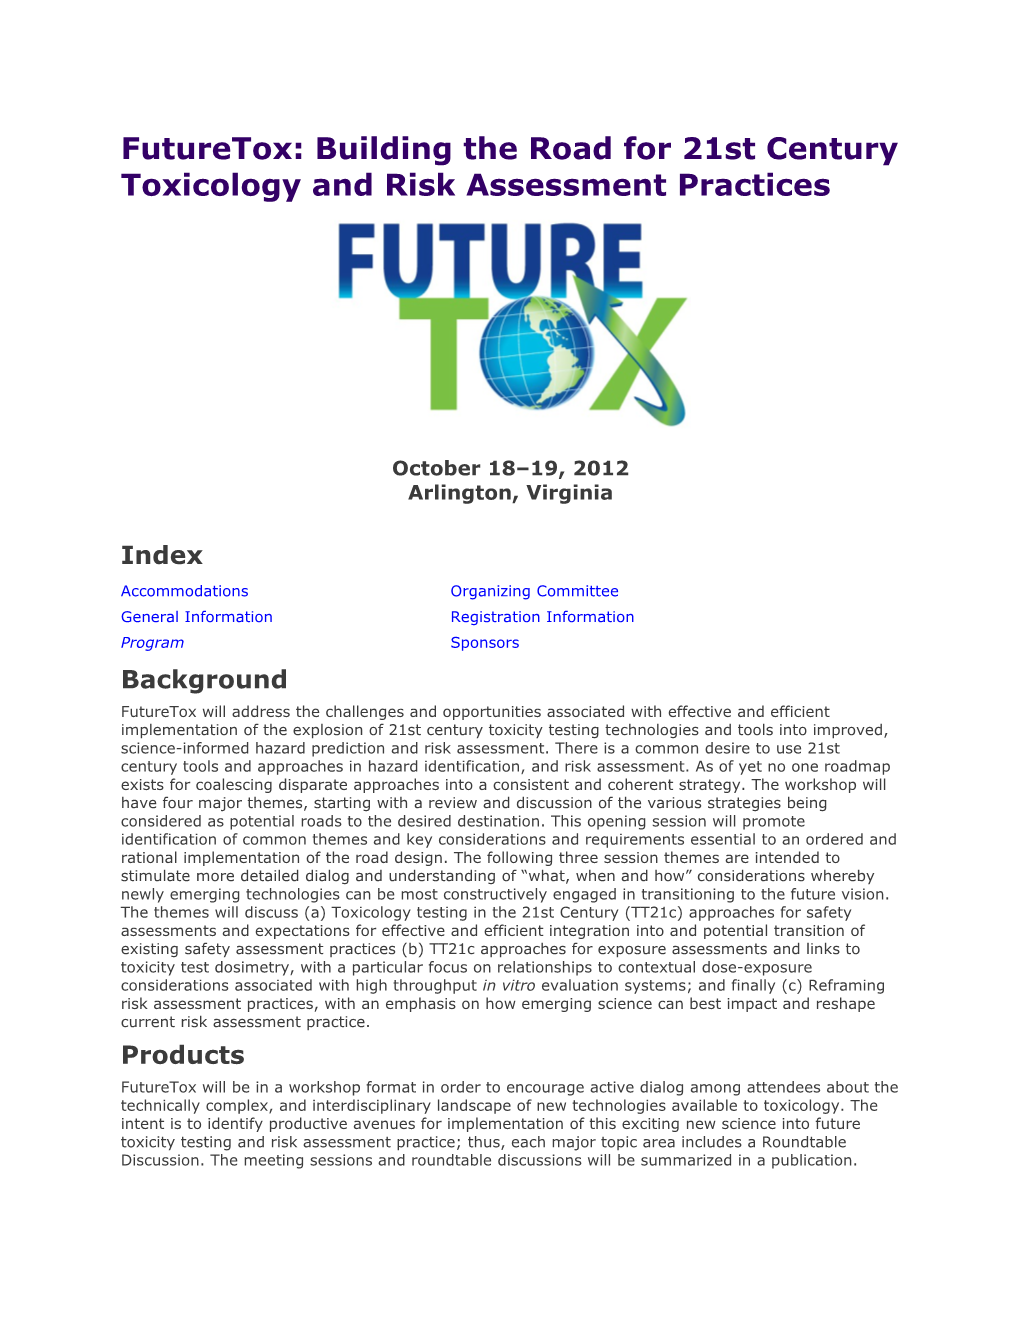 Futuretox: Building the Road for 21St Century Toxicology and Risk Assessment Practices